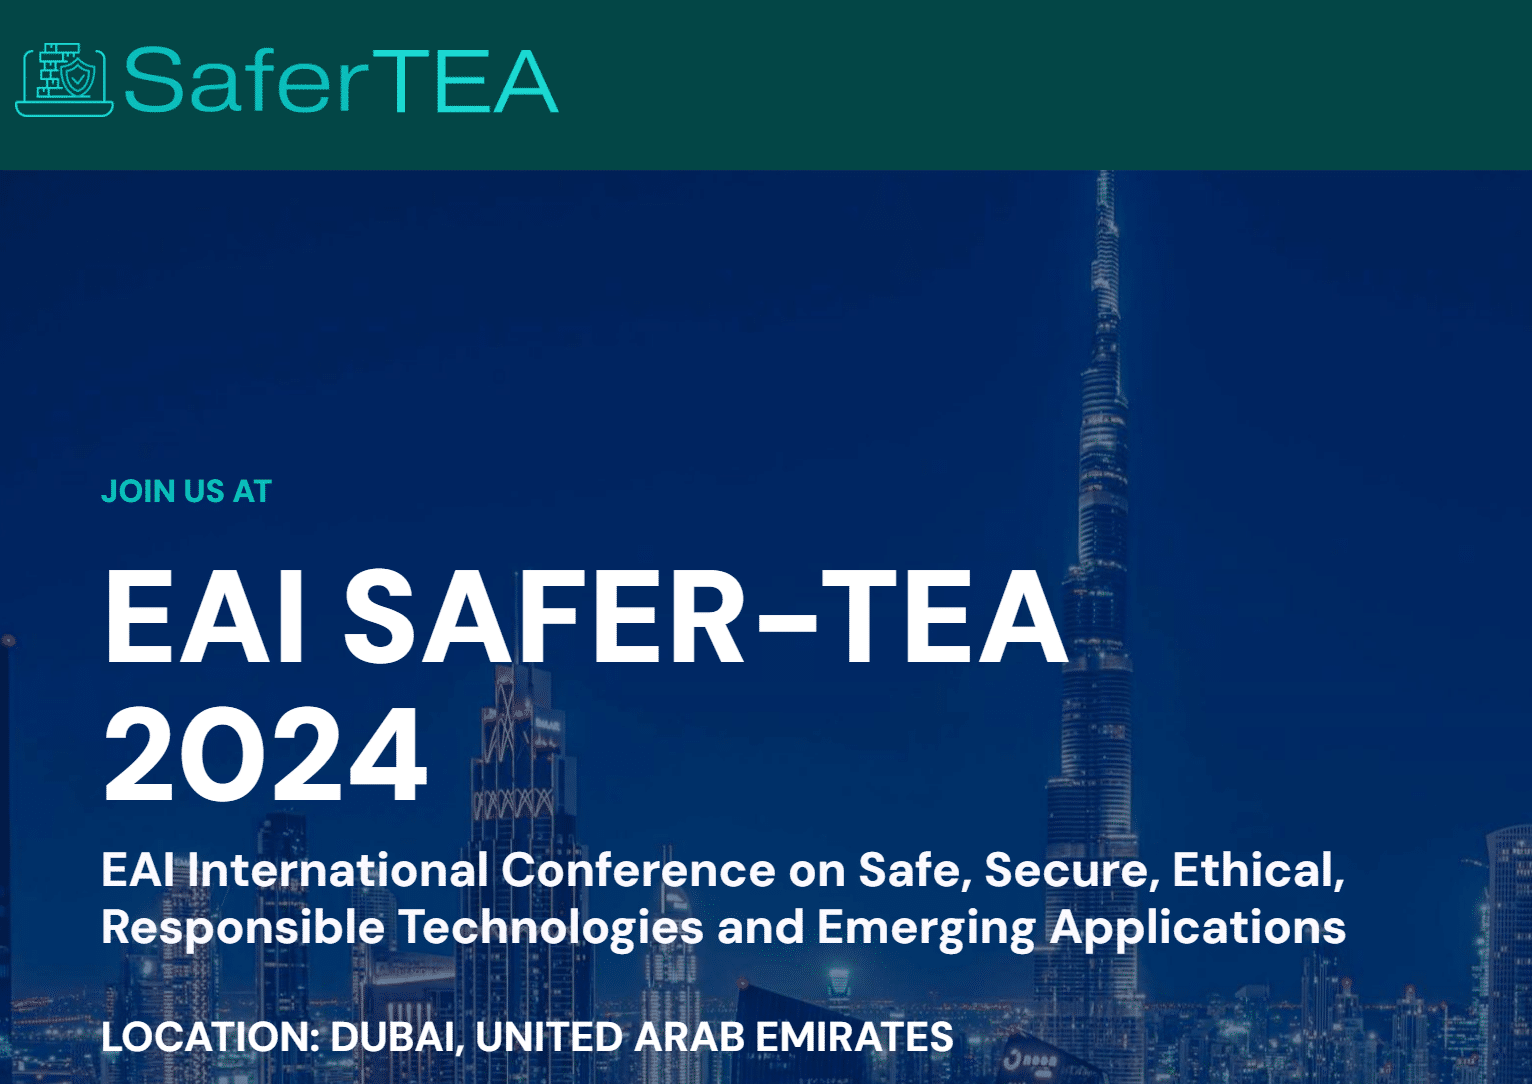 2nd EAI International Conference on Safe, Secure, Ethical, Responsible Technologies and Emerging Applications